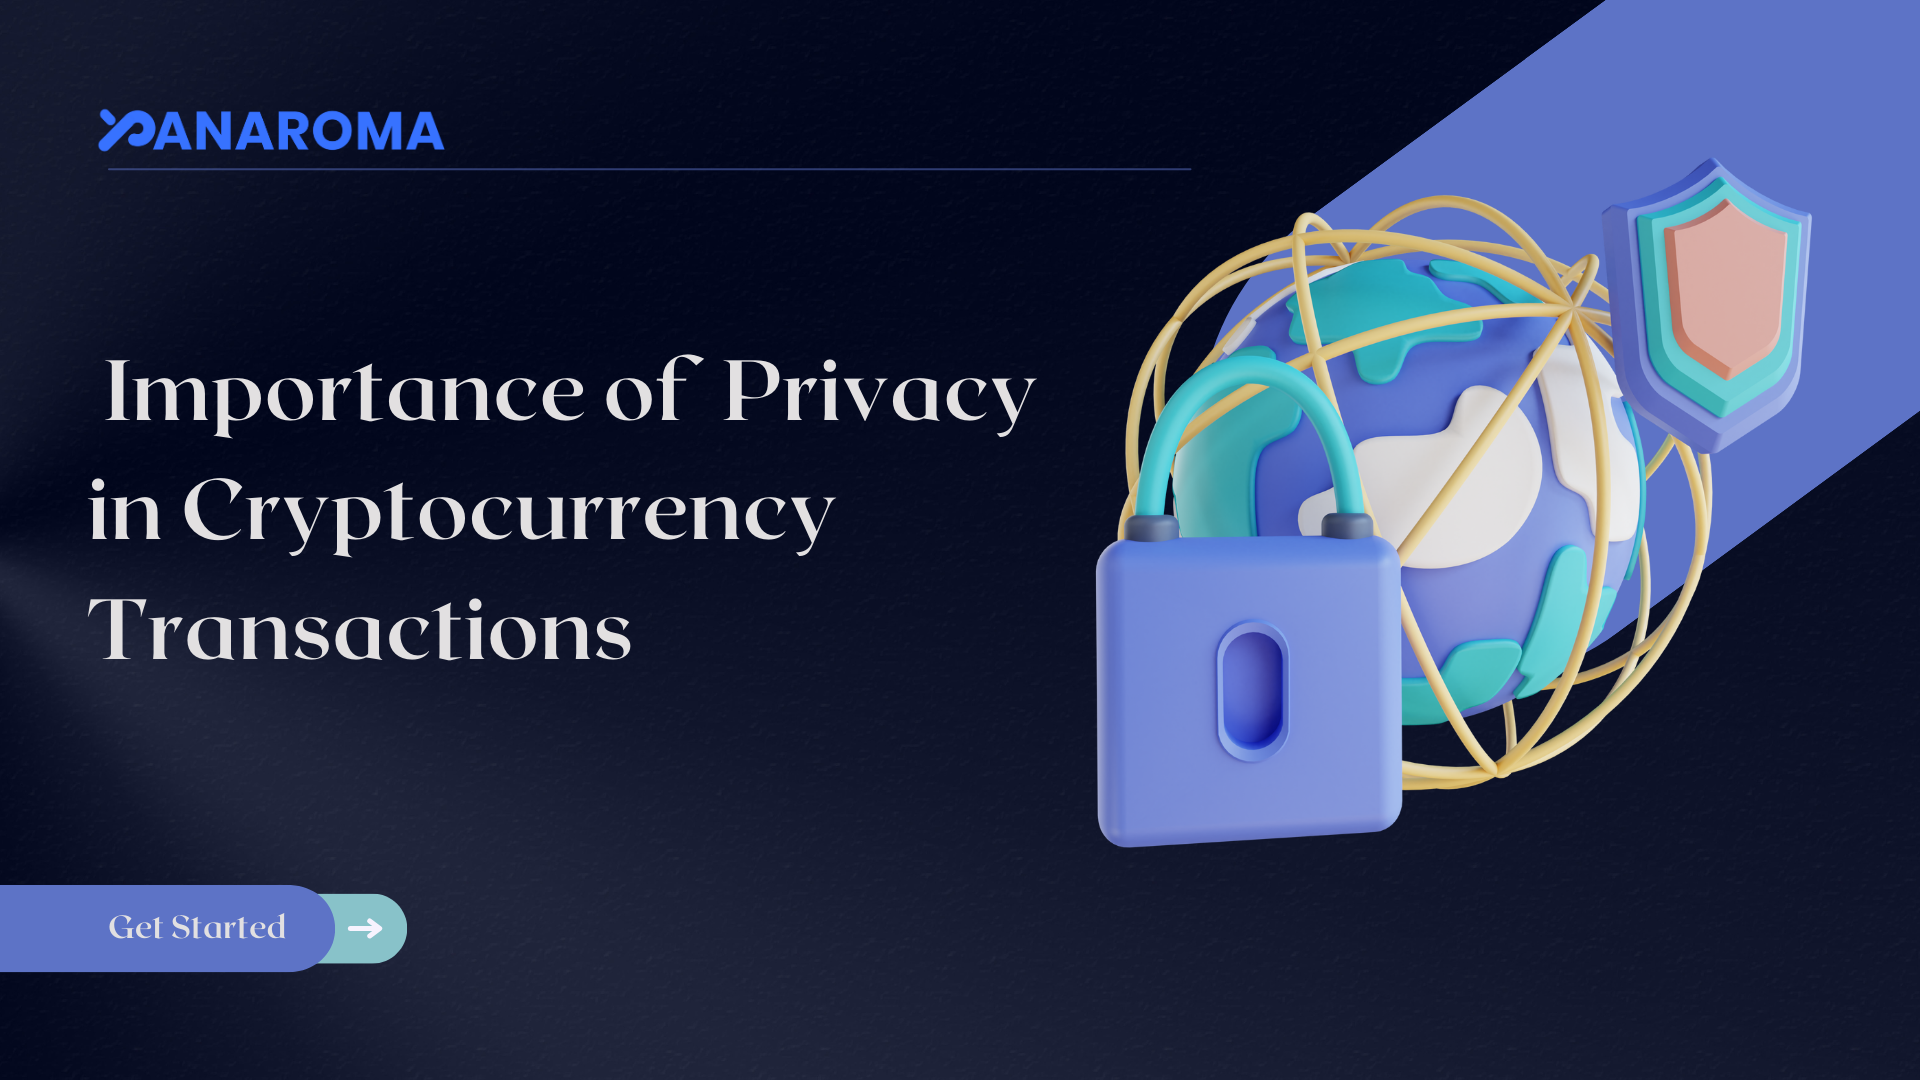 The Importance of Privacy in Cryptocurrency Transactions